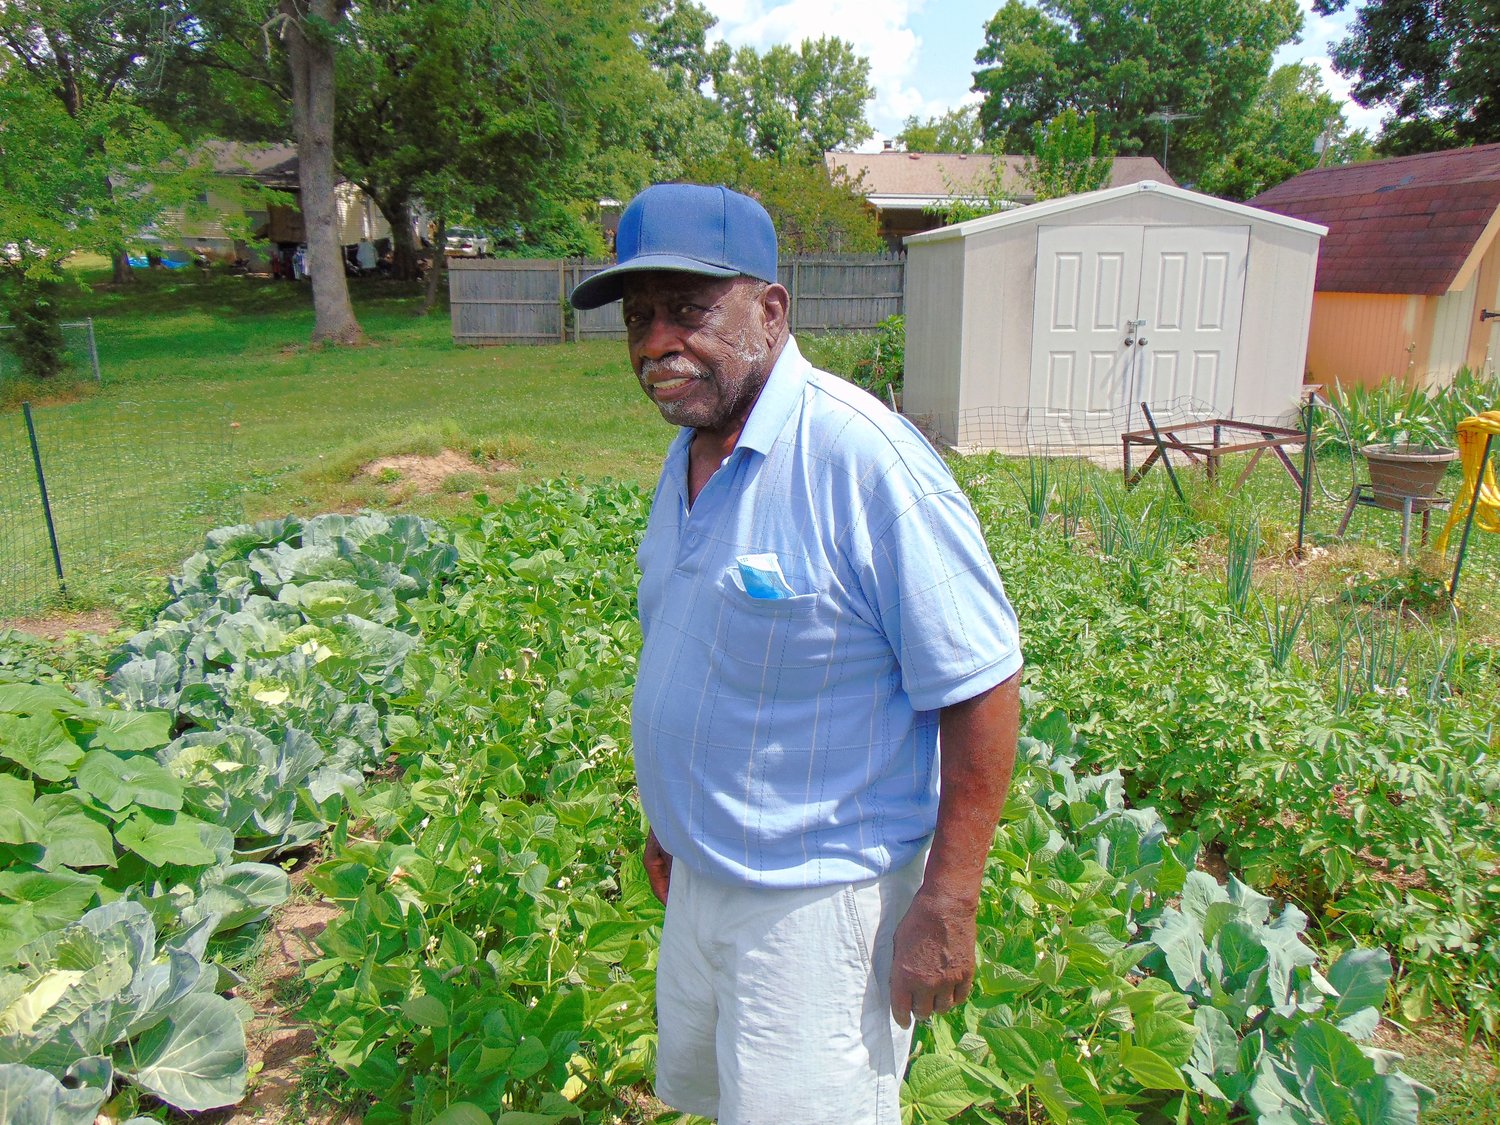 Ed Castleman is still gardening and a long-time Shelbyville resident and County Commissioner.